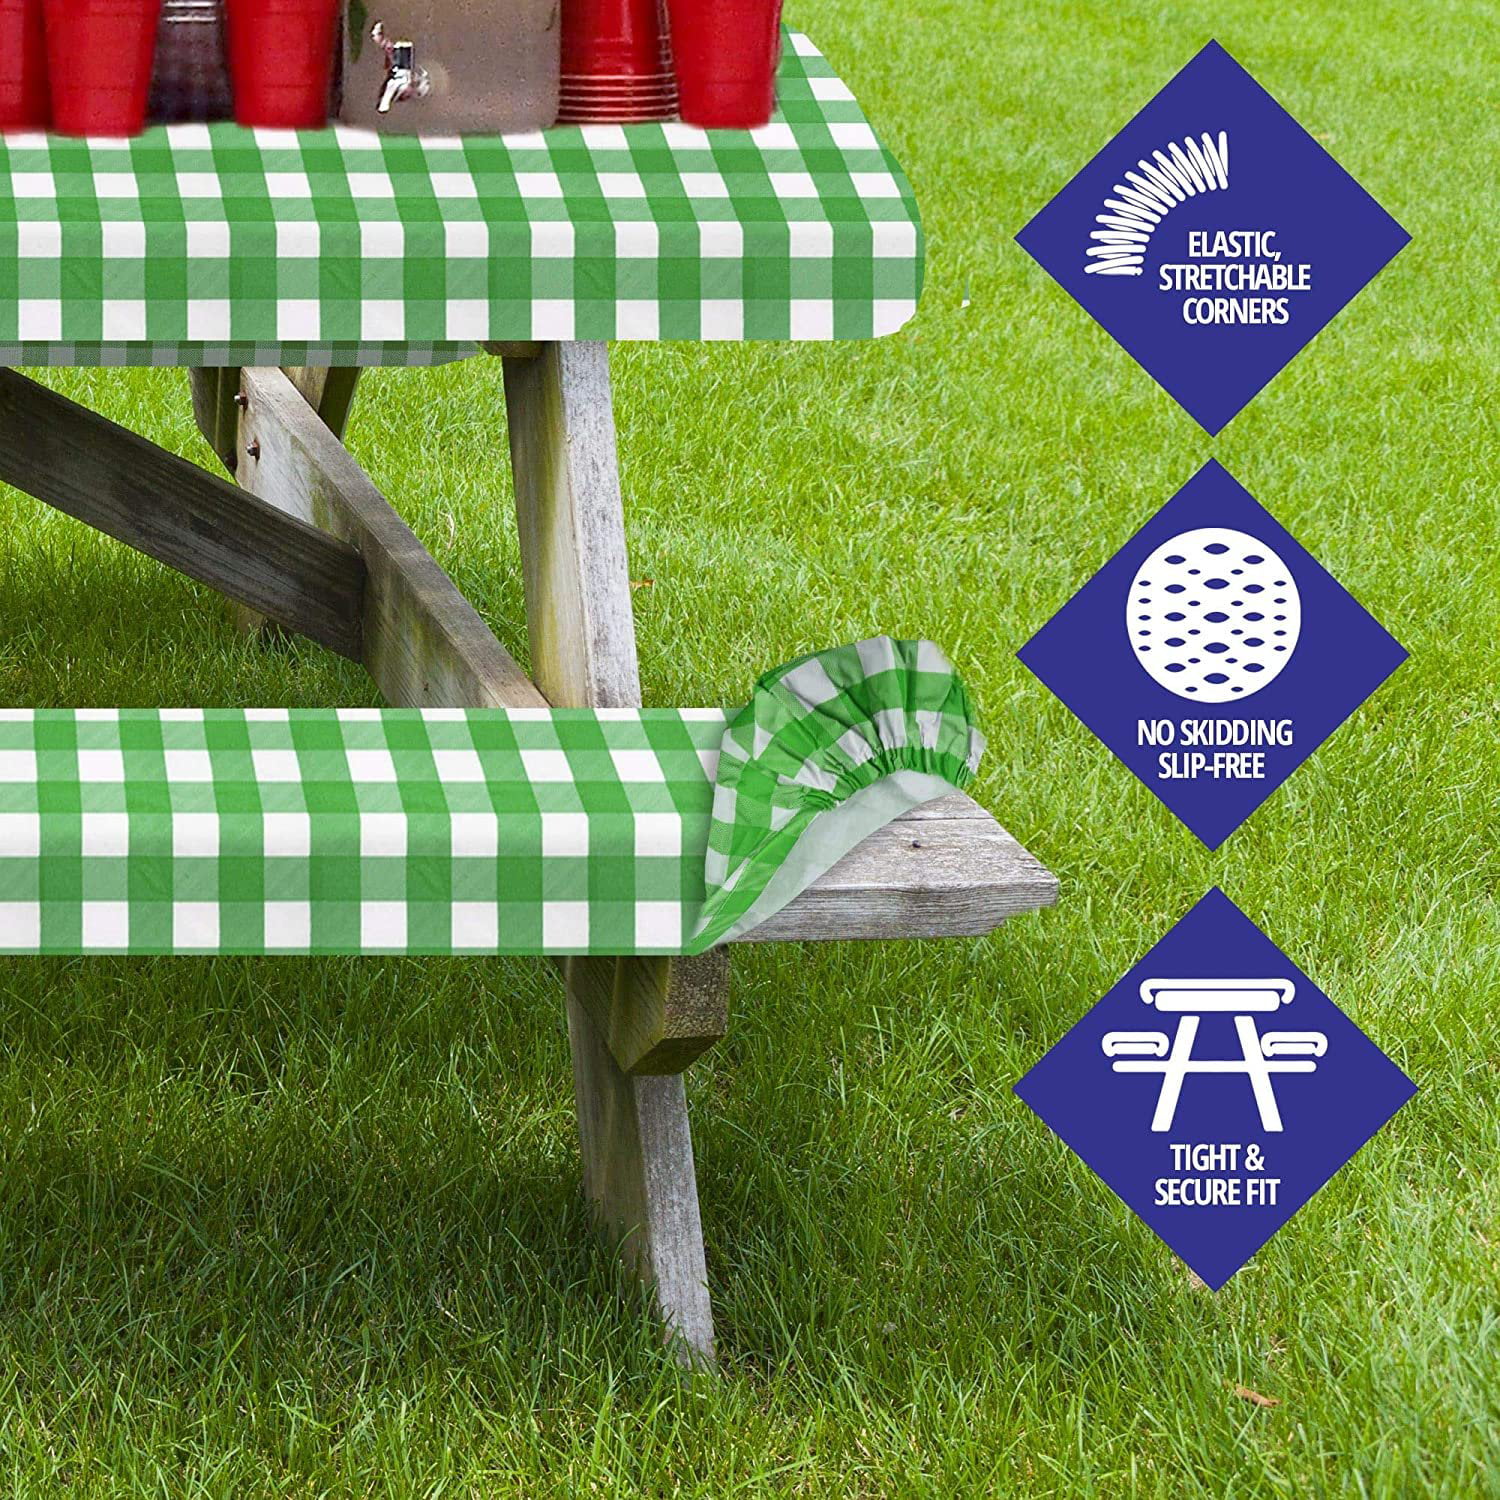 Picnic Table Cover with Bench Covers 3 Piece Patio Set Vinyl Elastic Fitted Tablecloth Flannel Backing Plastic Tables Seat Cloth Outdoor Waterproof Oilcloth Camping Tablecloths Checkered Blue White 